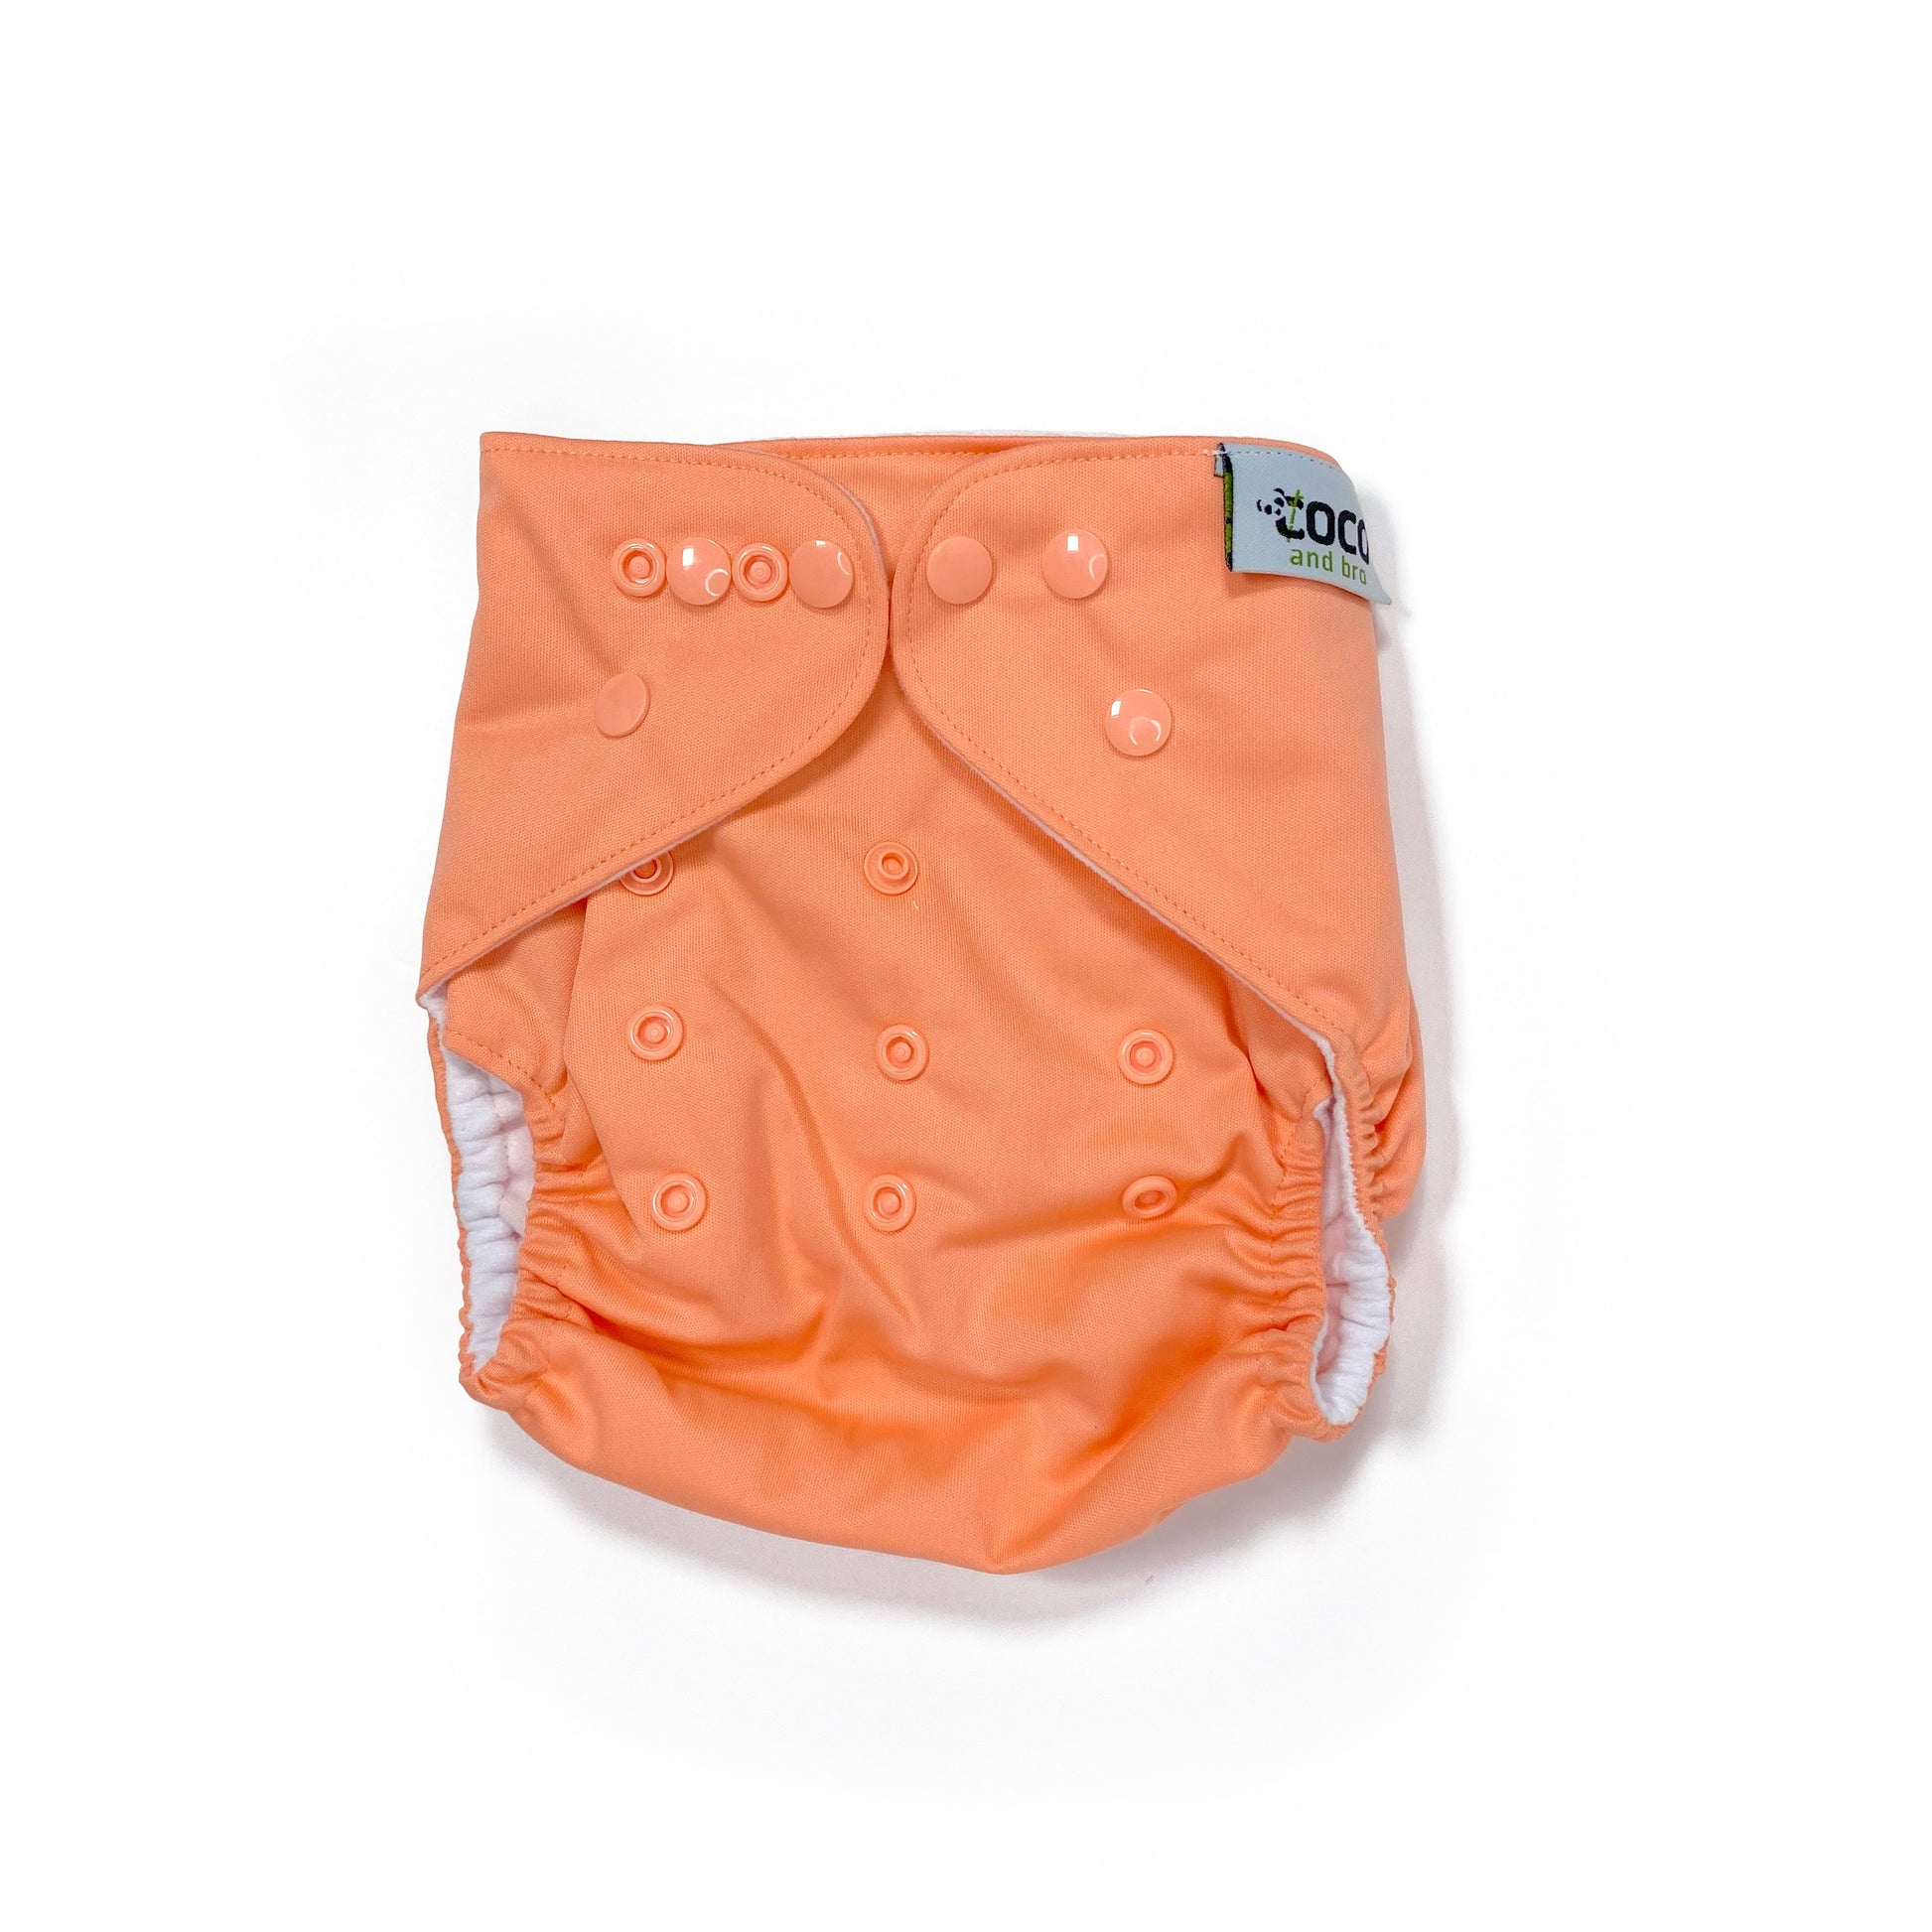 An adjustable reusable nappy for babies and toddlers, in a bright coral colour. View shows the front of the nappy.